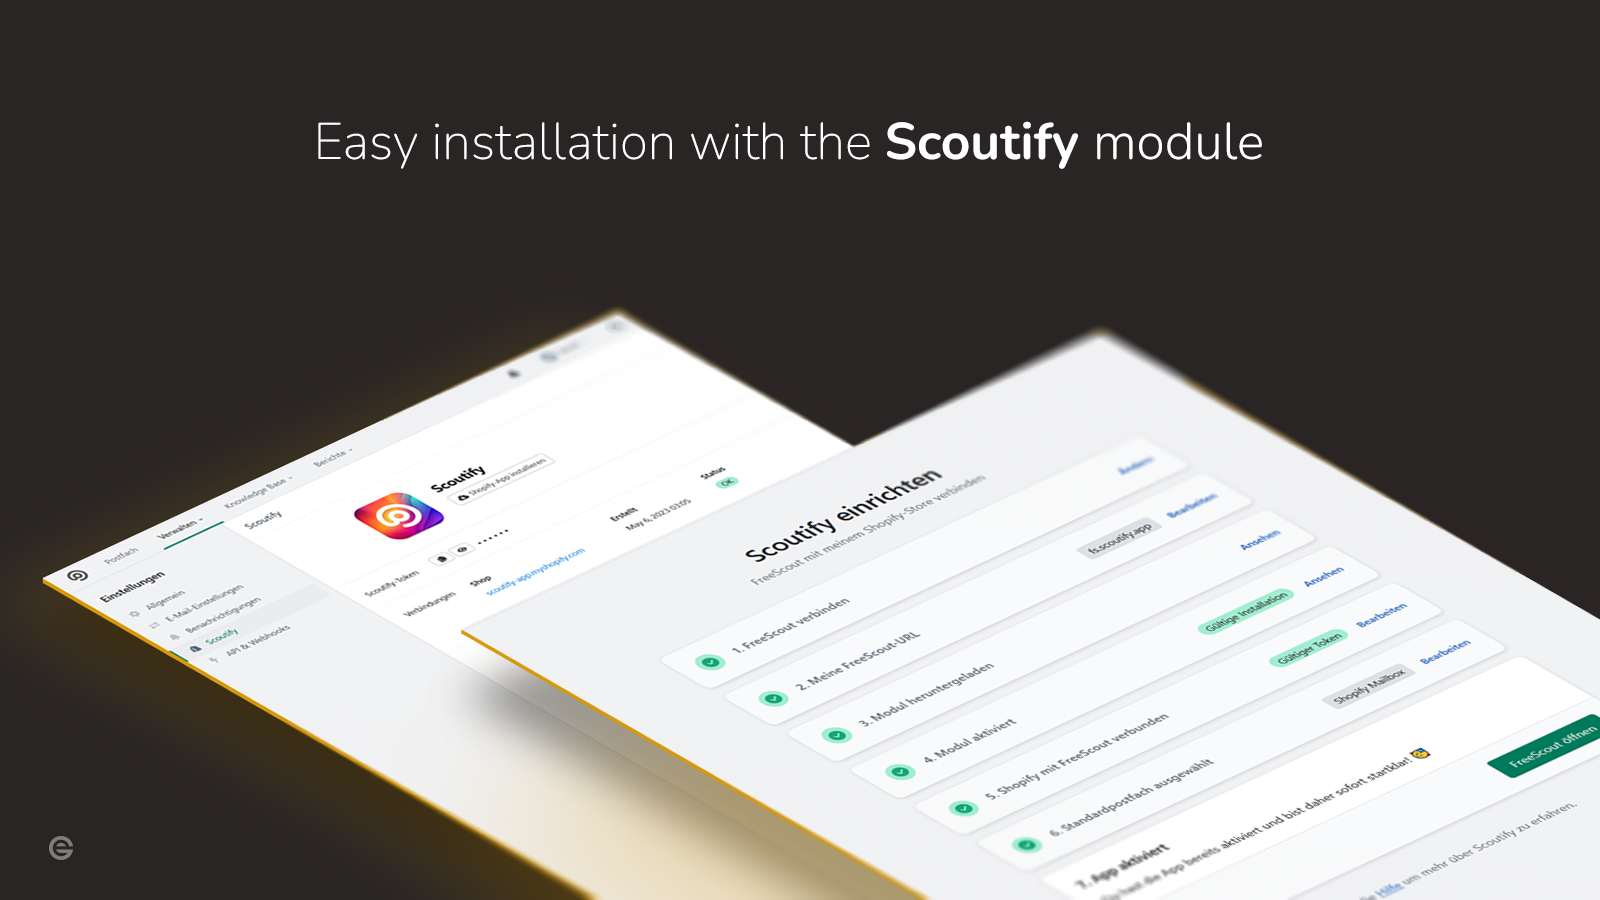 Easy installation with the Scoutify module